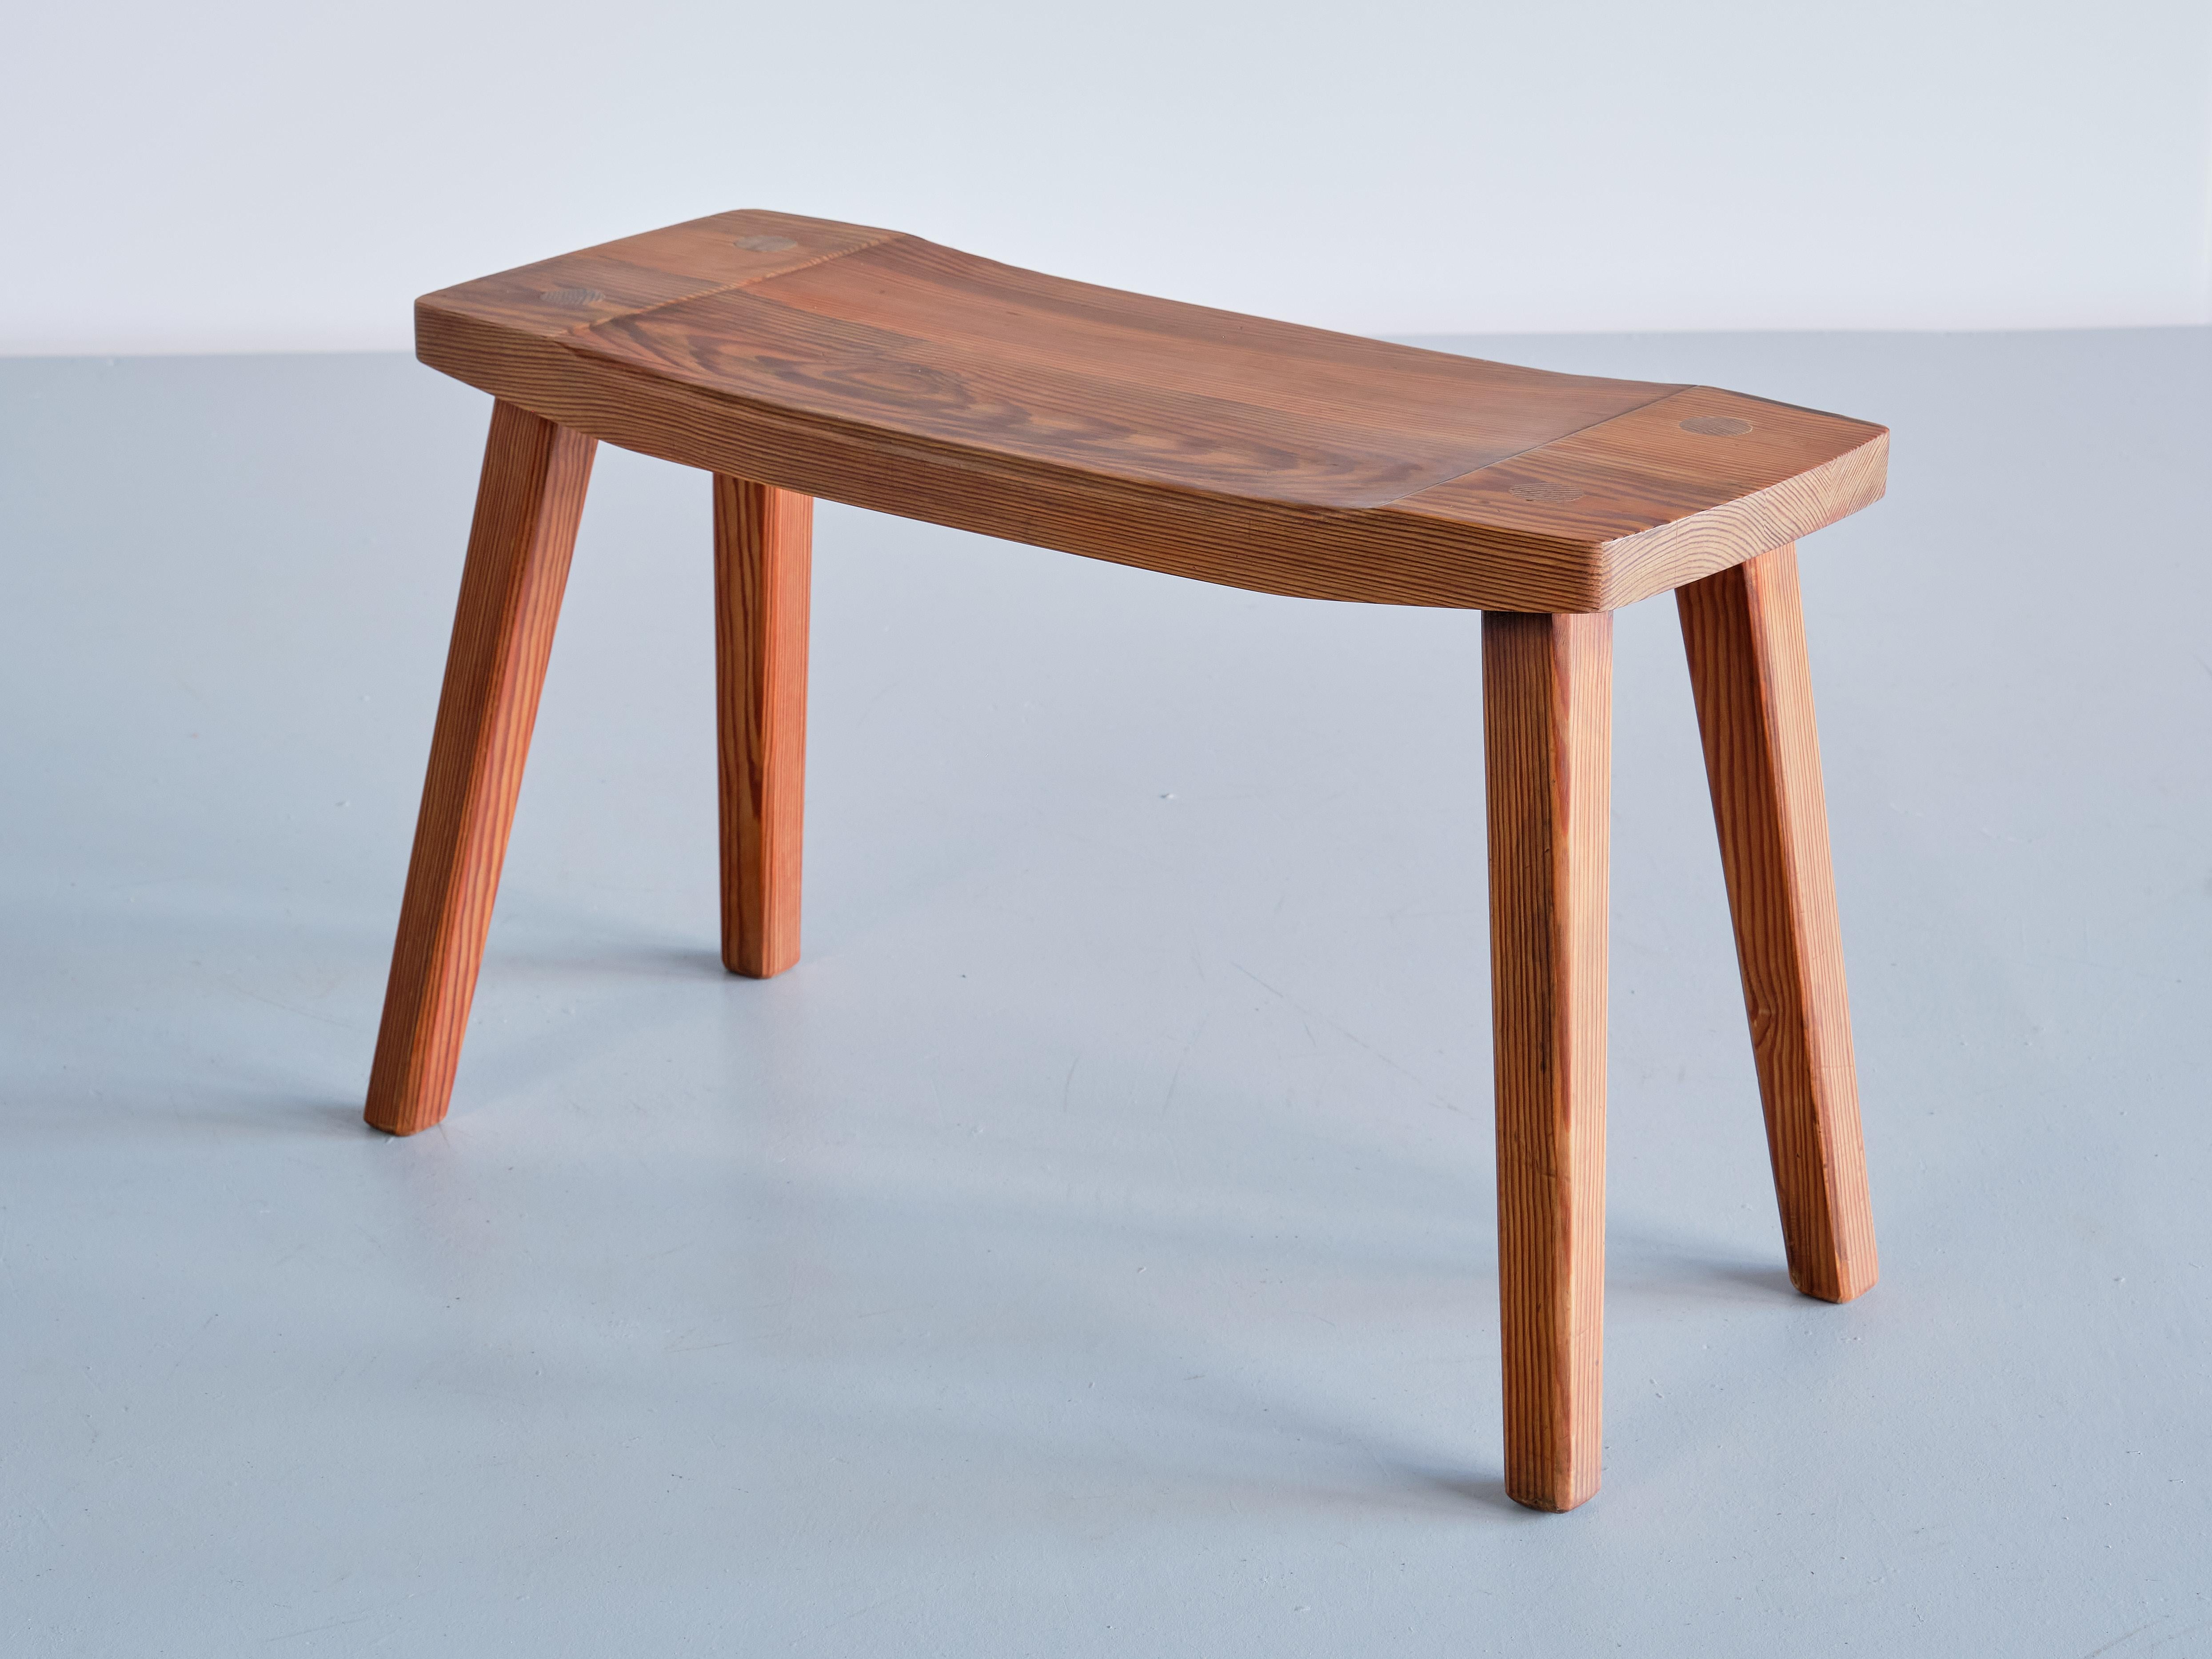 Mid-20th Century Swedish Modern Rectangular Stool in Solid Pine, Sweden, 1950s For Sale